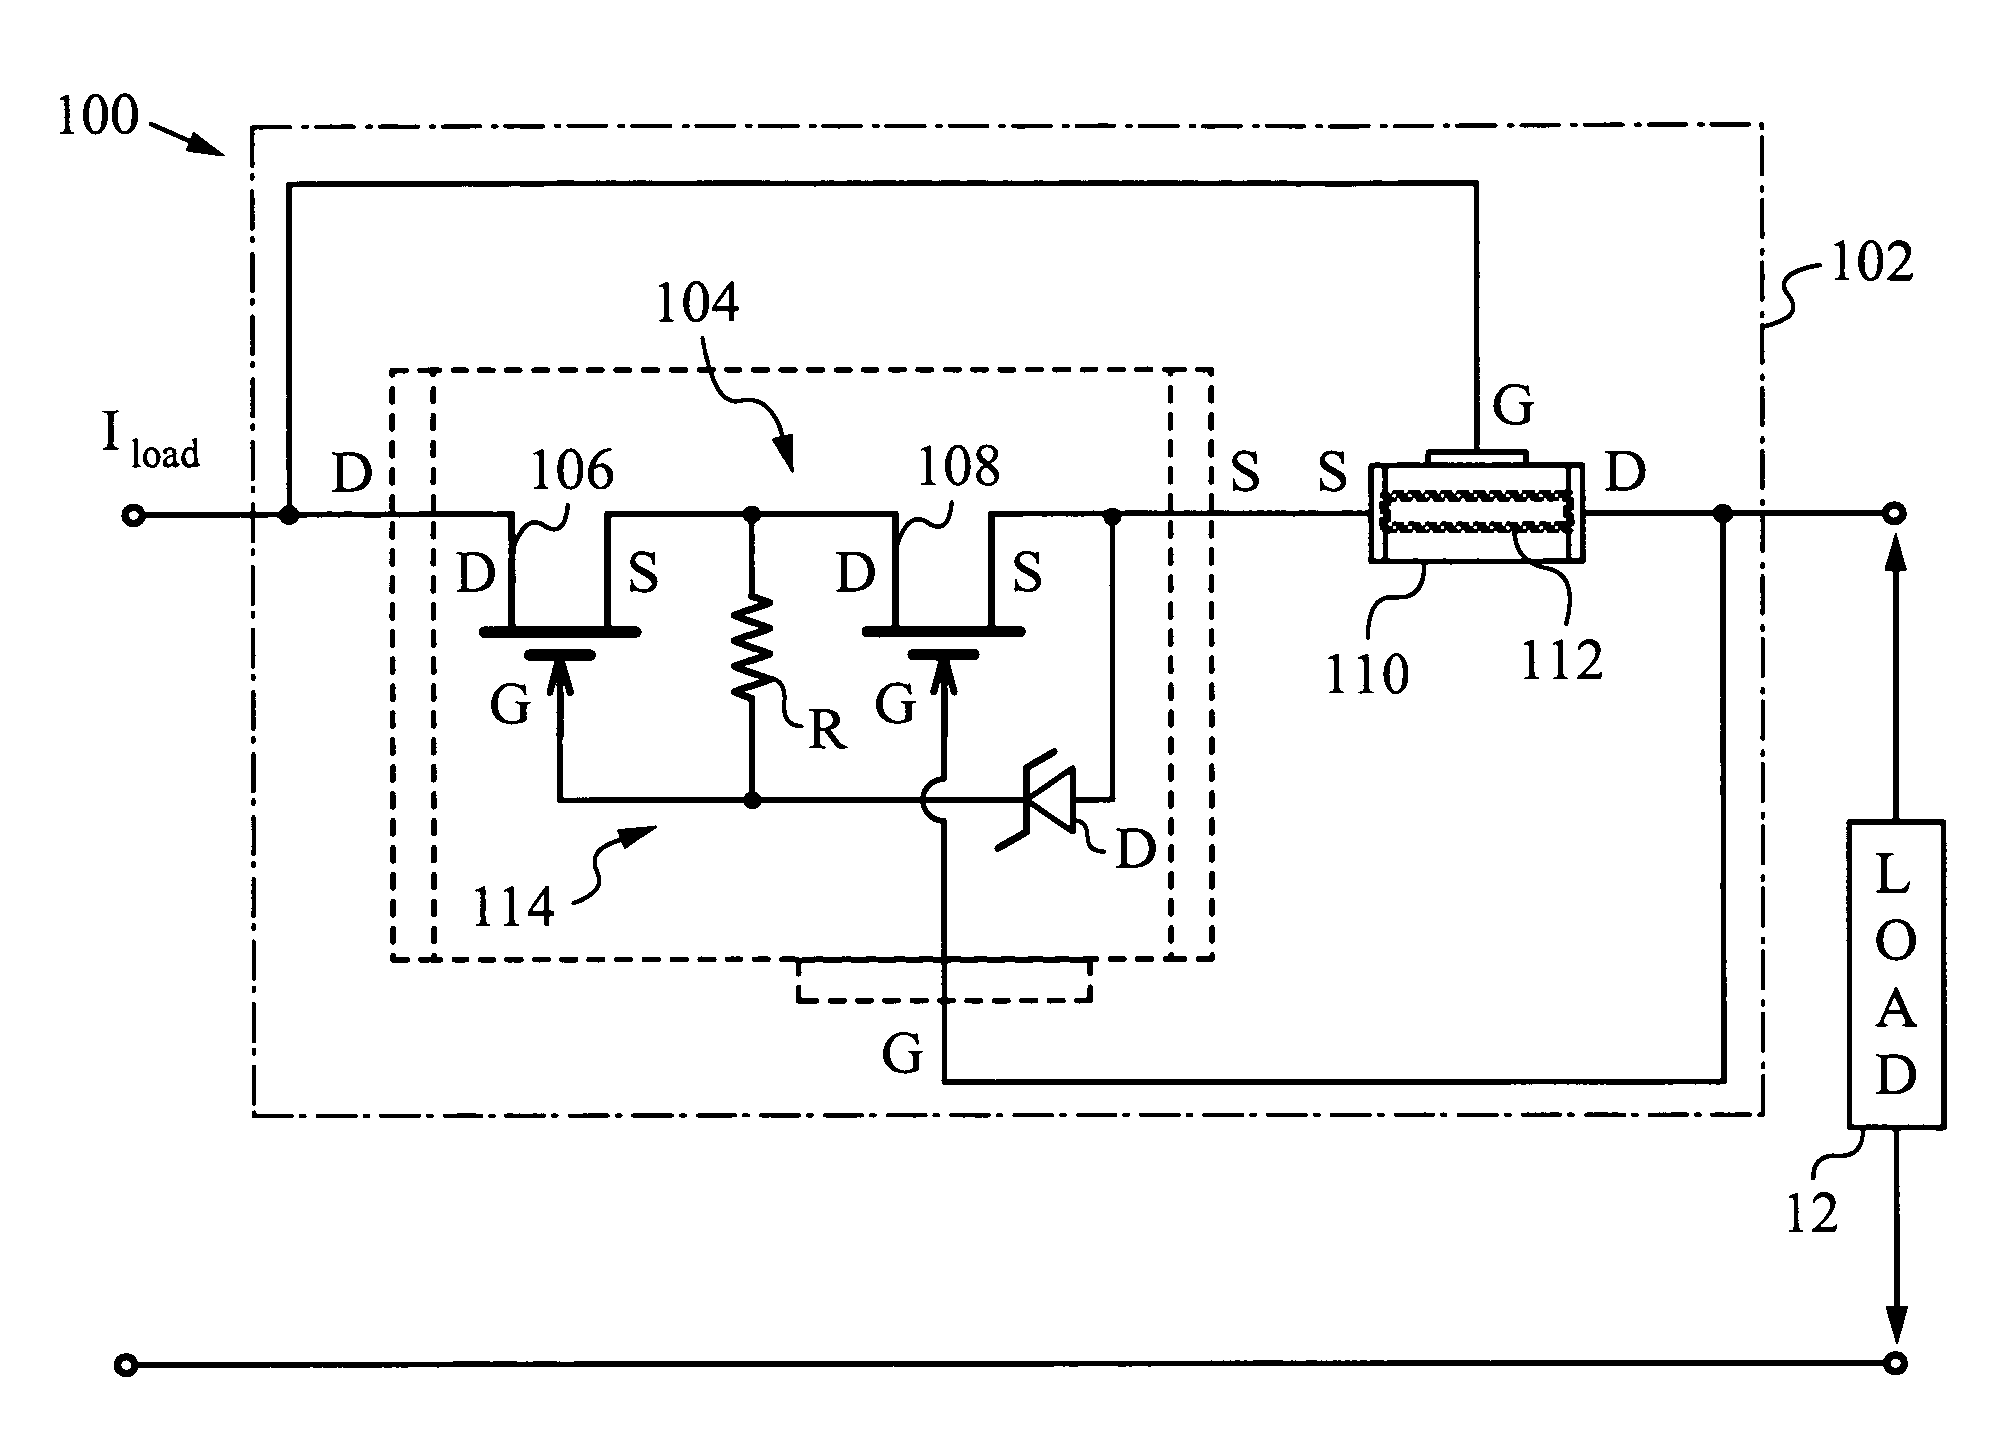 Apparatus and method for high-voltage transient blocking using low voltage elements